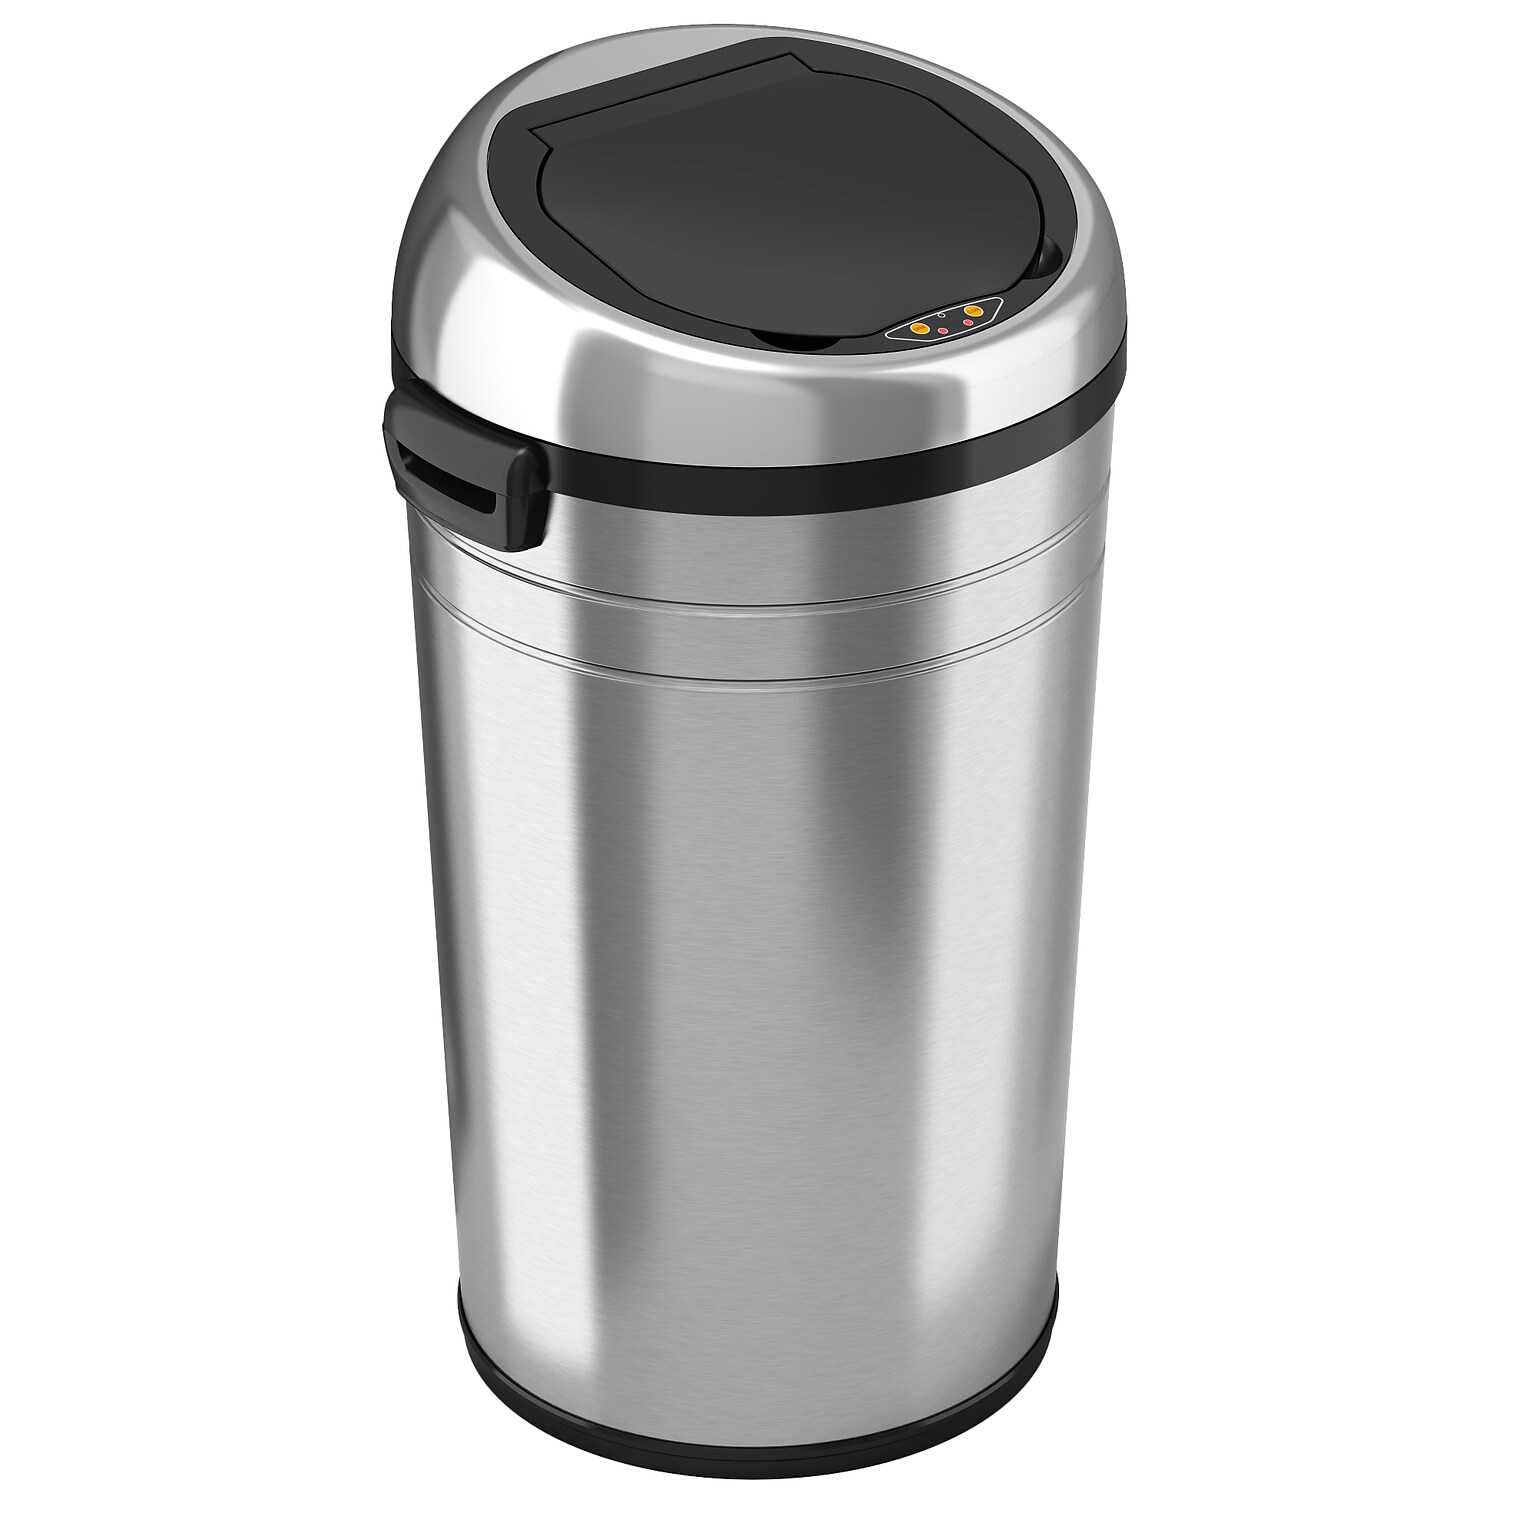 iTouchless Stainless Steel Round Sensor Trash Can with AbsorbX Odor Control System and Wheels, 23 Gal., Silver (IT23RC)